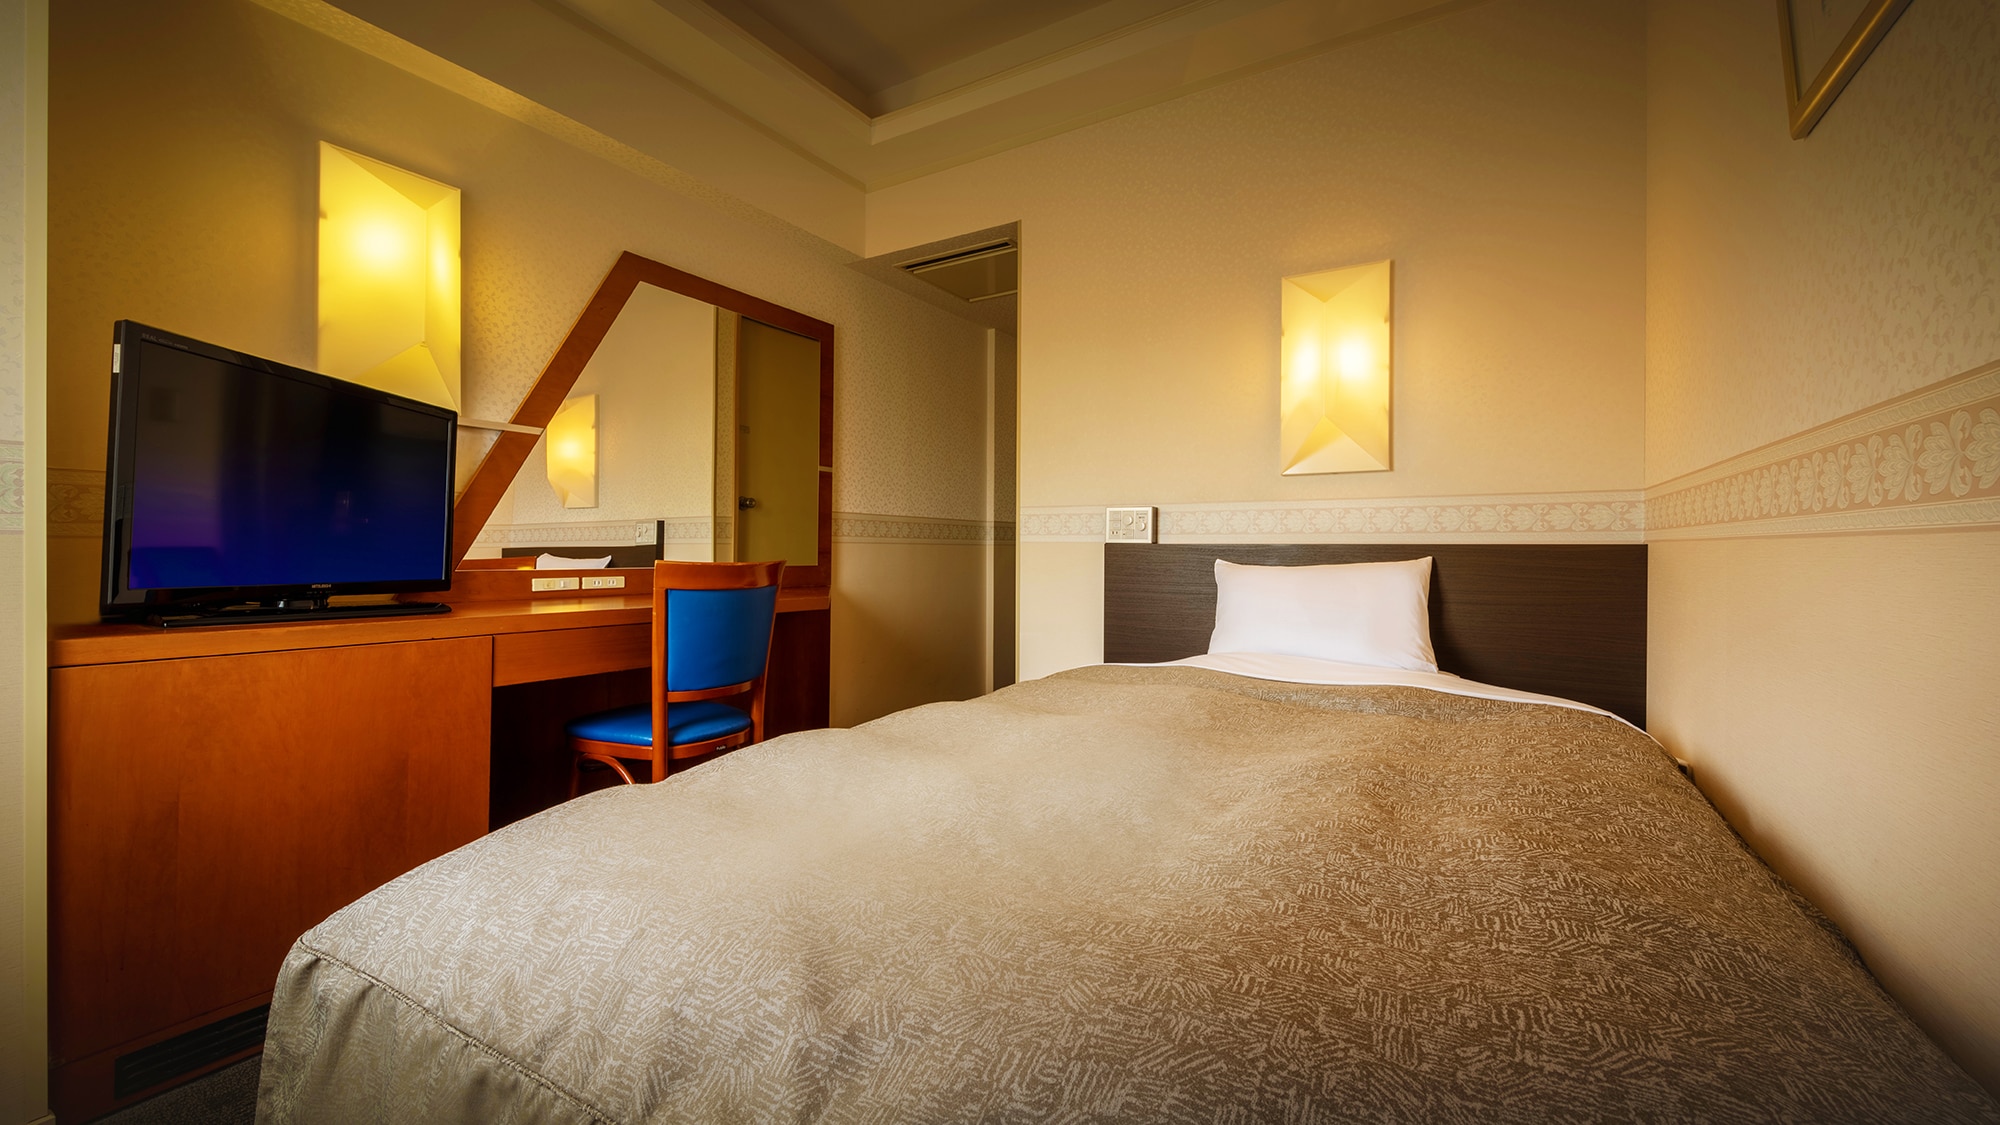 [Annex / Comfort Semi-Double] A spacious bed room that is easy to use for both business and sightseeing.